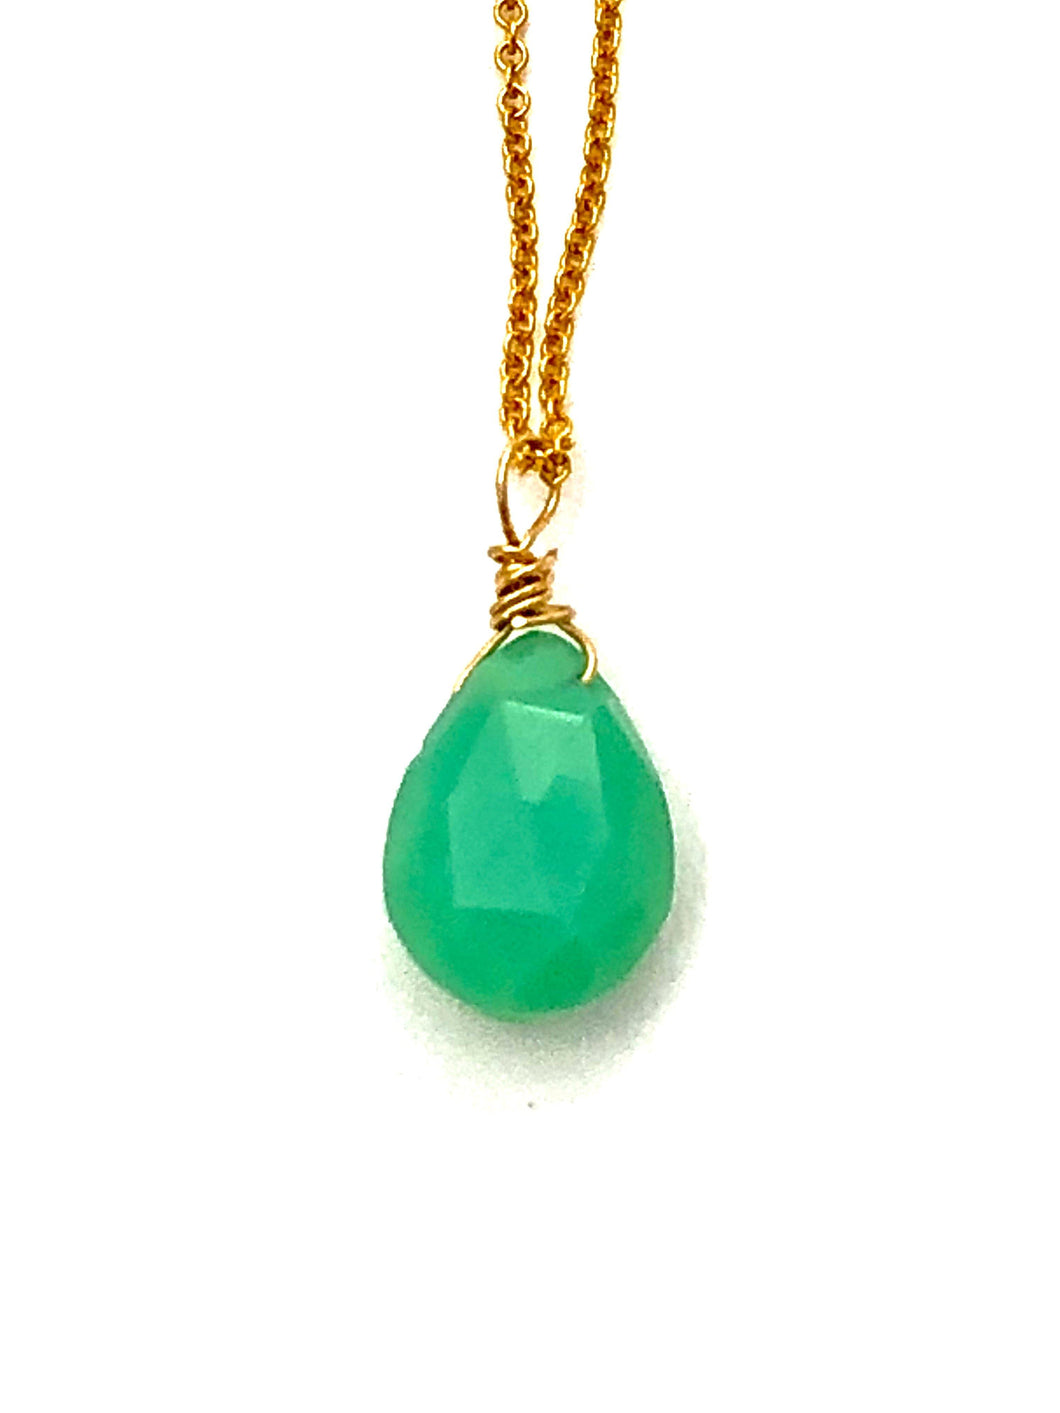 Chrysoprase Goldfilled Necklace - Full Moon Designs